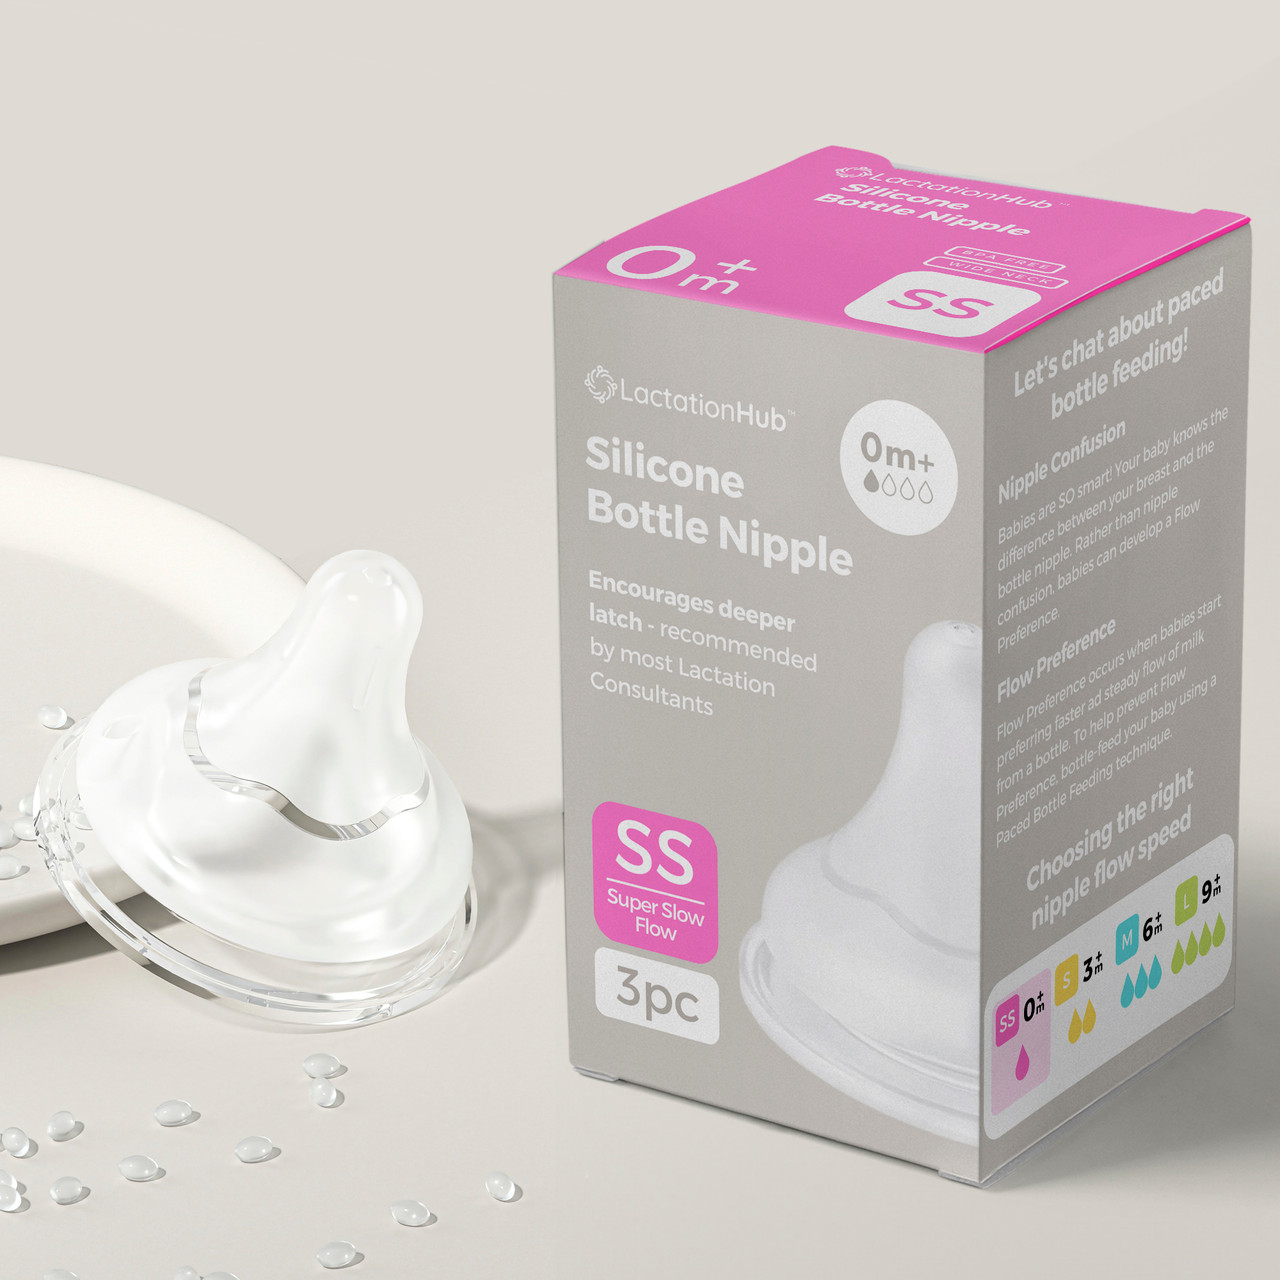 GentleFlow+ Bottle Nipple with Gradual Slope for Breastfed and